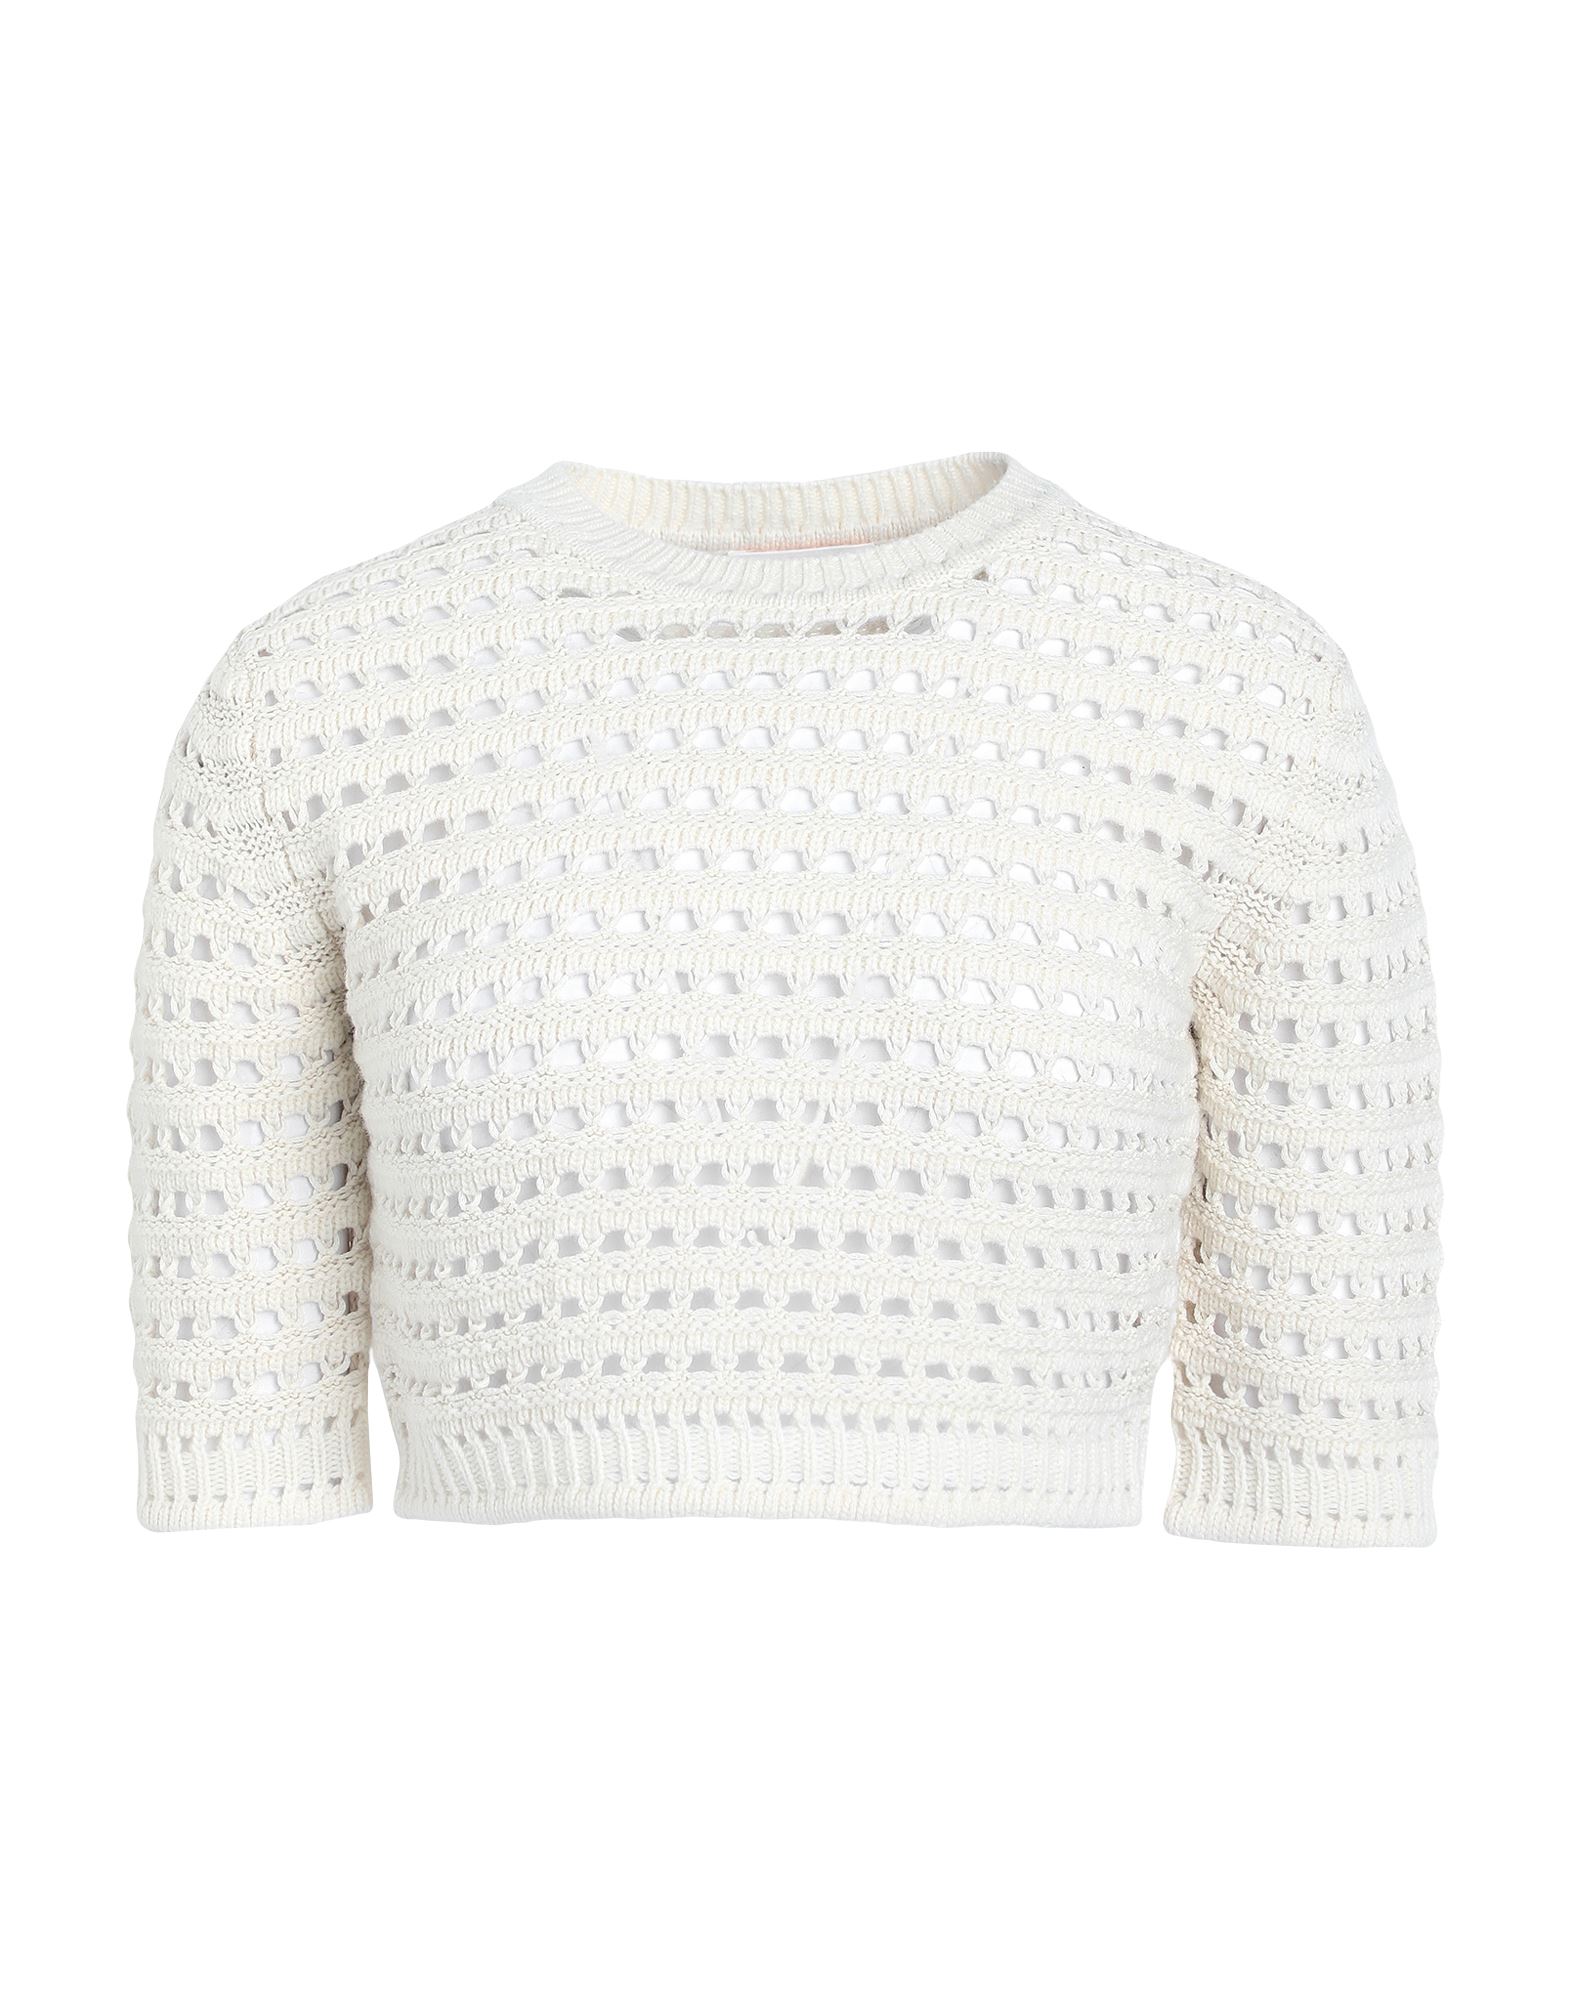 SEE BY CHLOÉ SEE BY CHLOÉ WOMAN SWEATER IVORY SIZE L WOOL, COTTON, POLYAMIDE